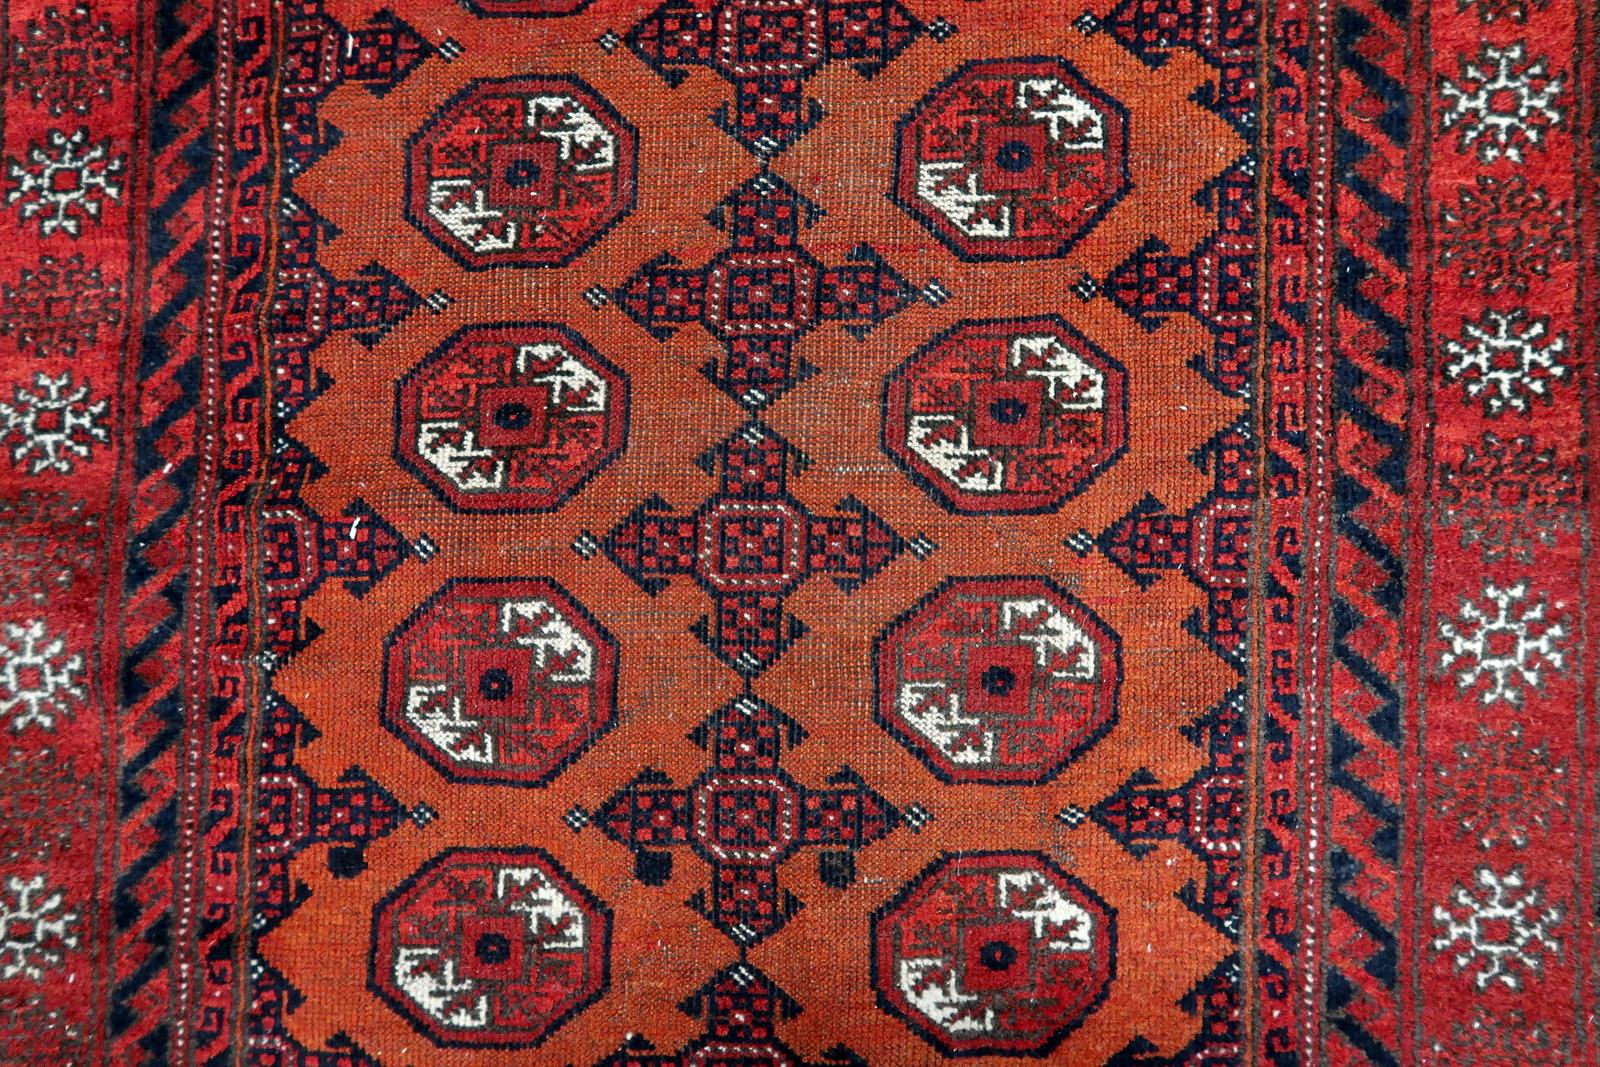 Handmade Antique Afghan Baluch Rug 3.8' x 4.8', 1920s - 1C1141 In Good Condition For Sale In Bordeaux, FR